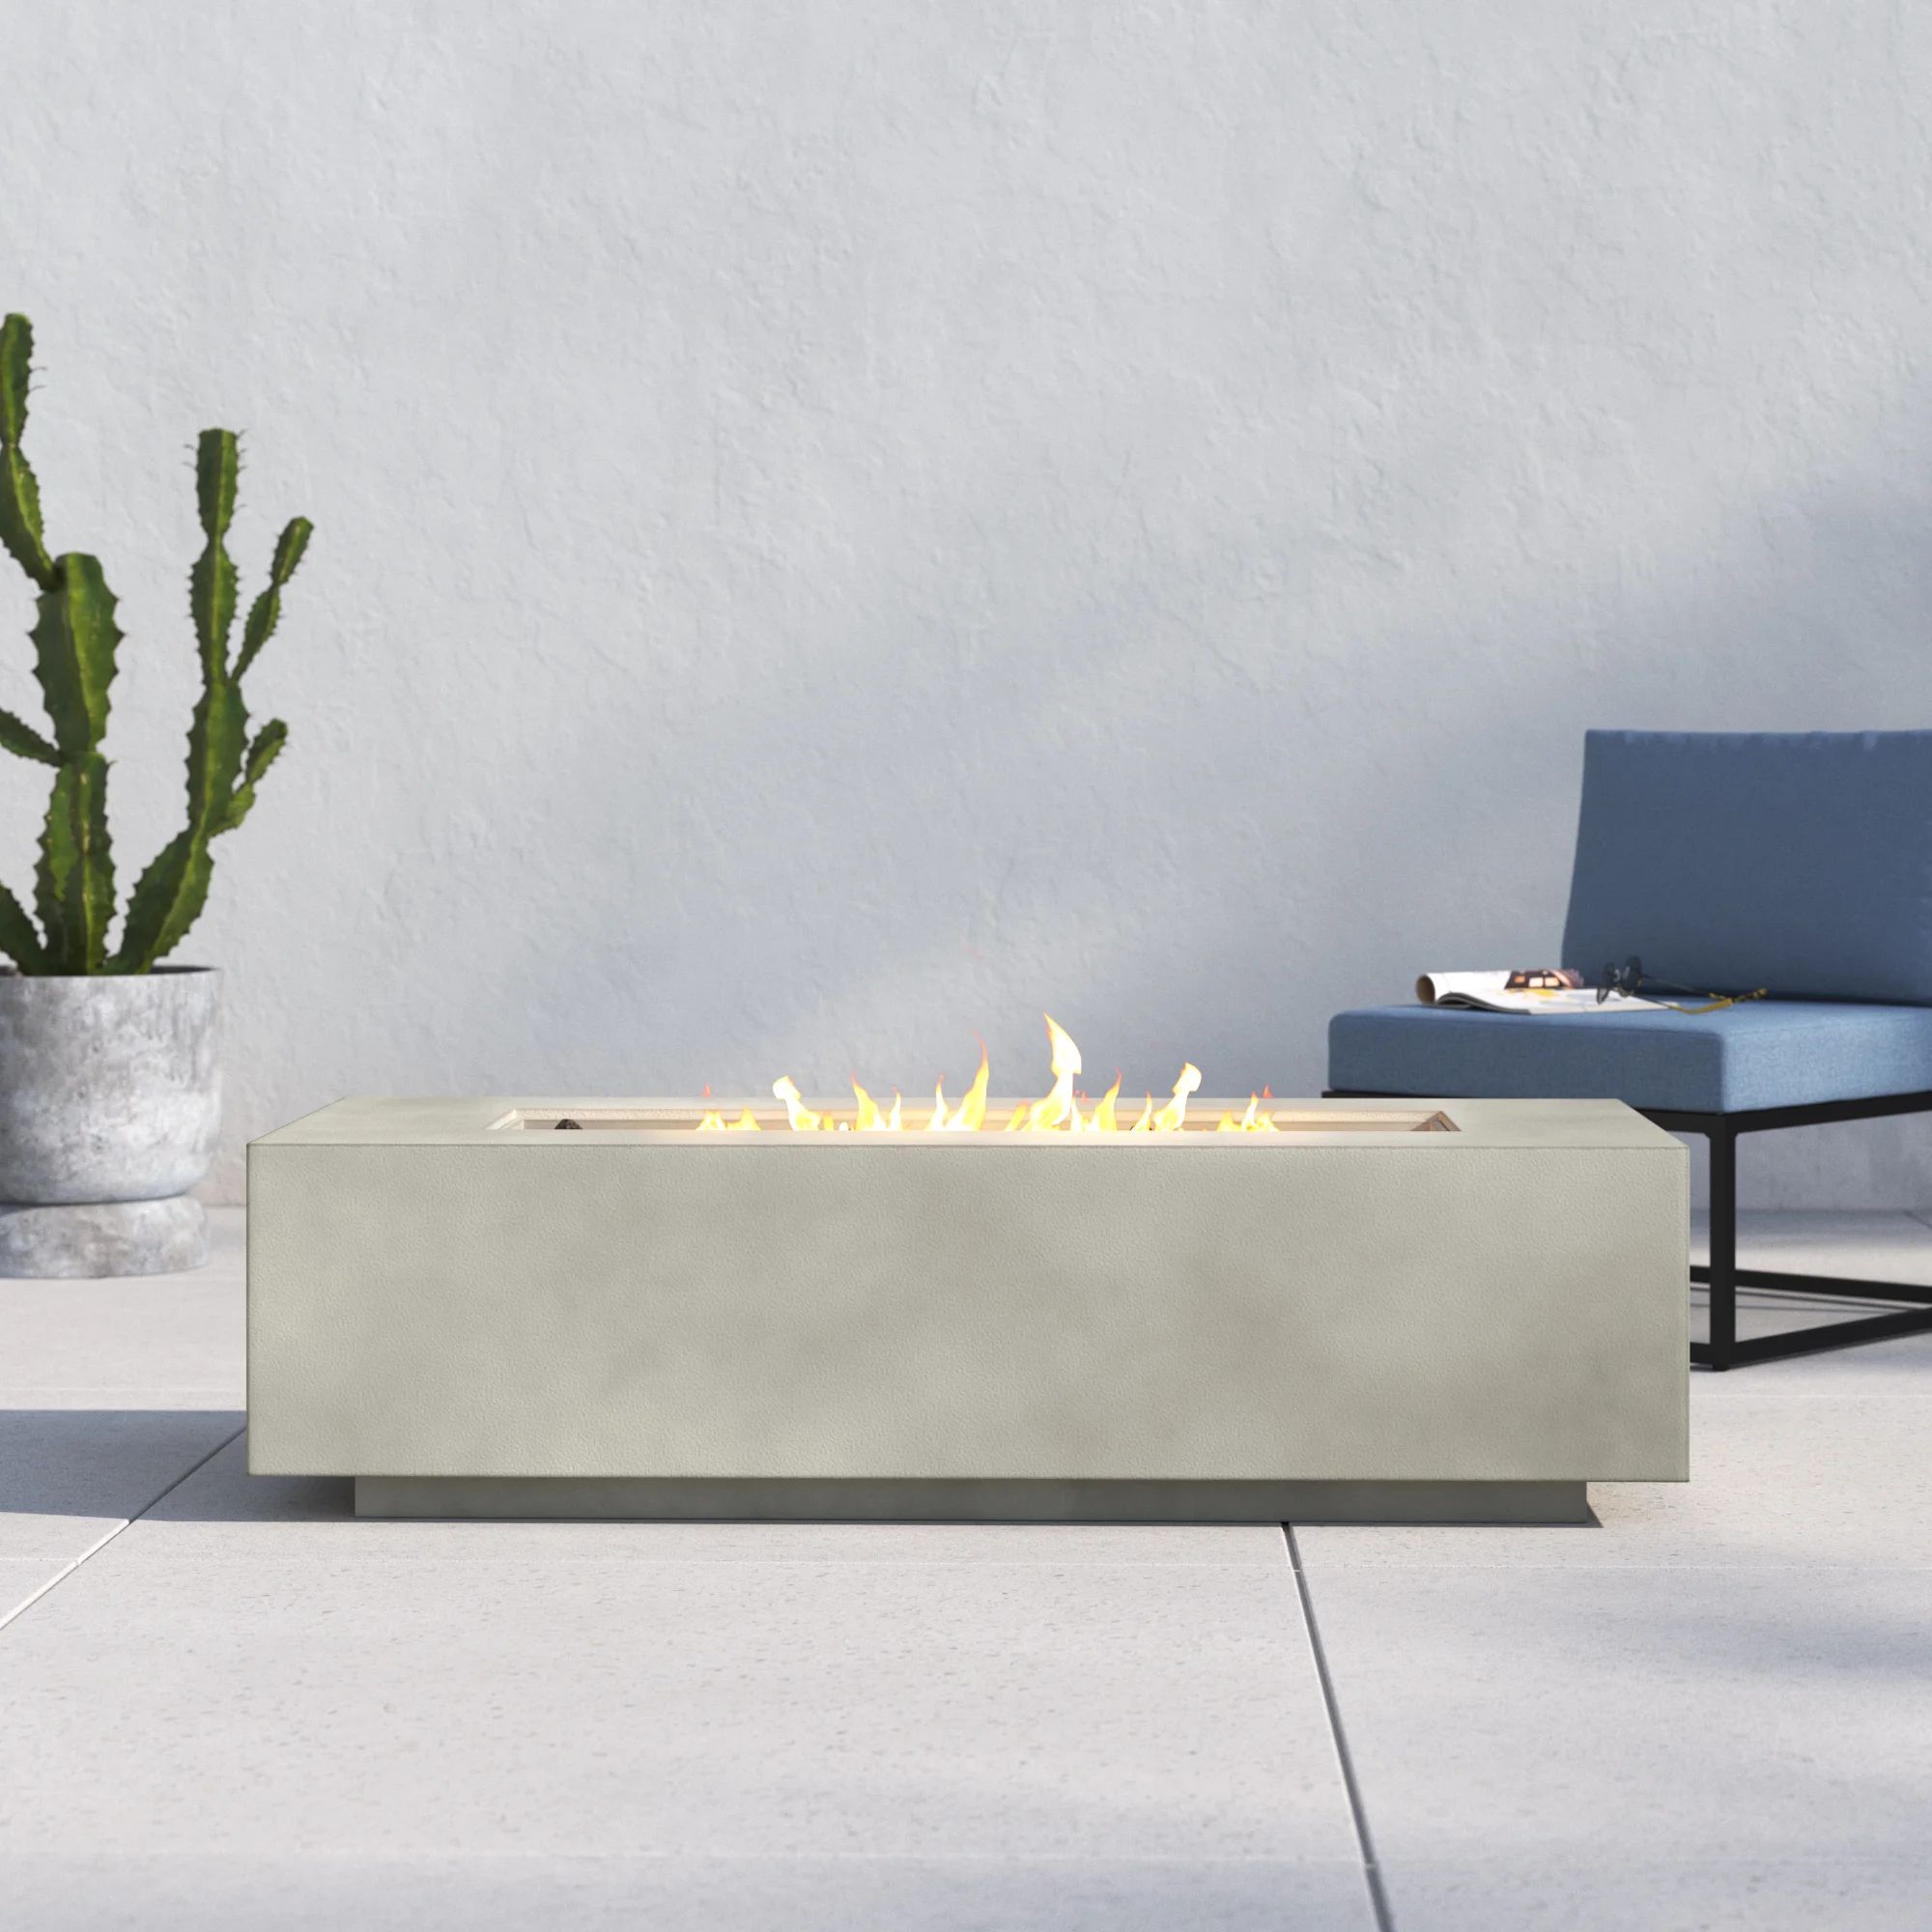 Aly Fiber Cast Concrete / Burner Stainless Steel Propane Gas Fire Pit Table | Wayfair North America